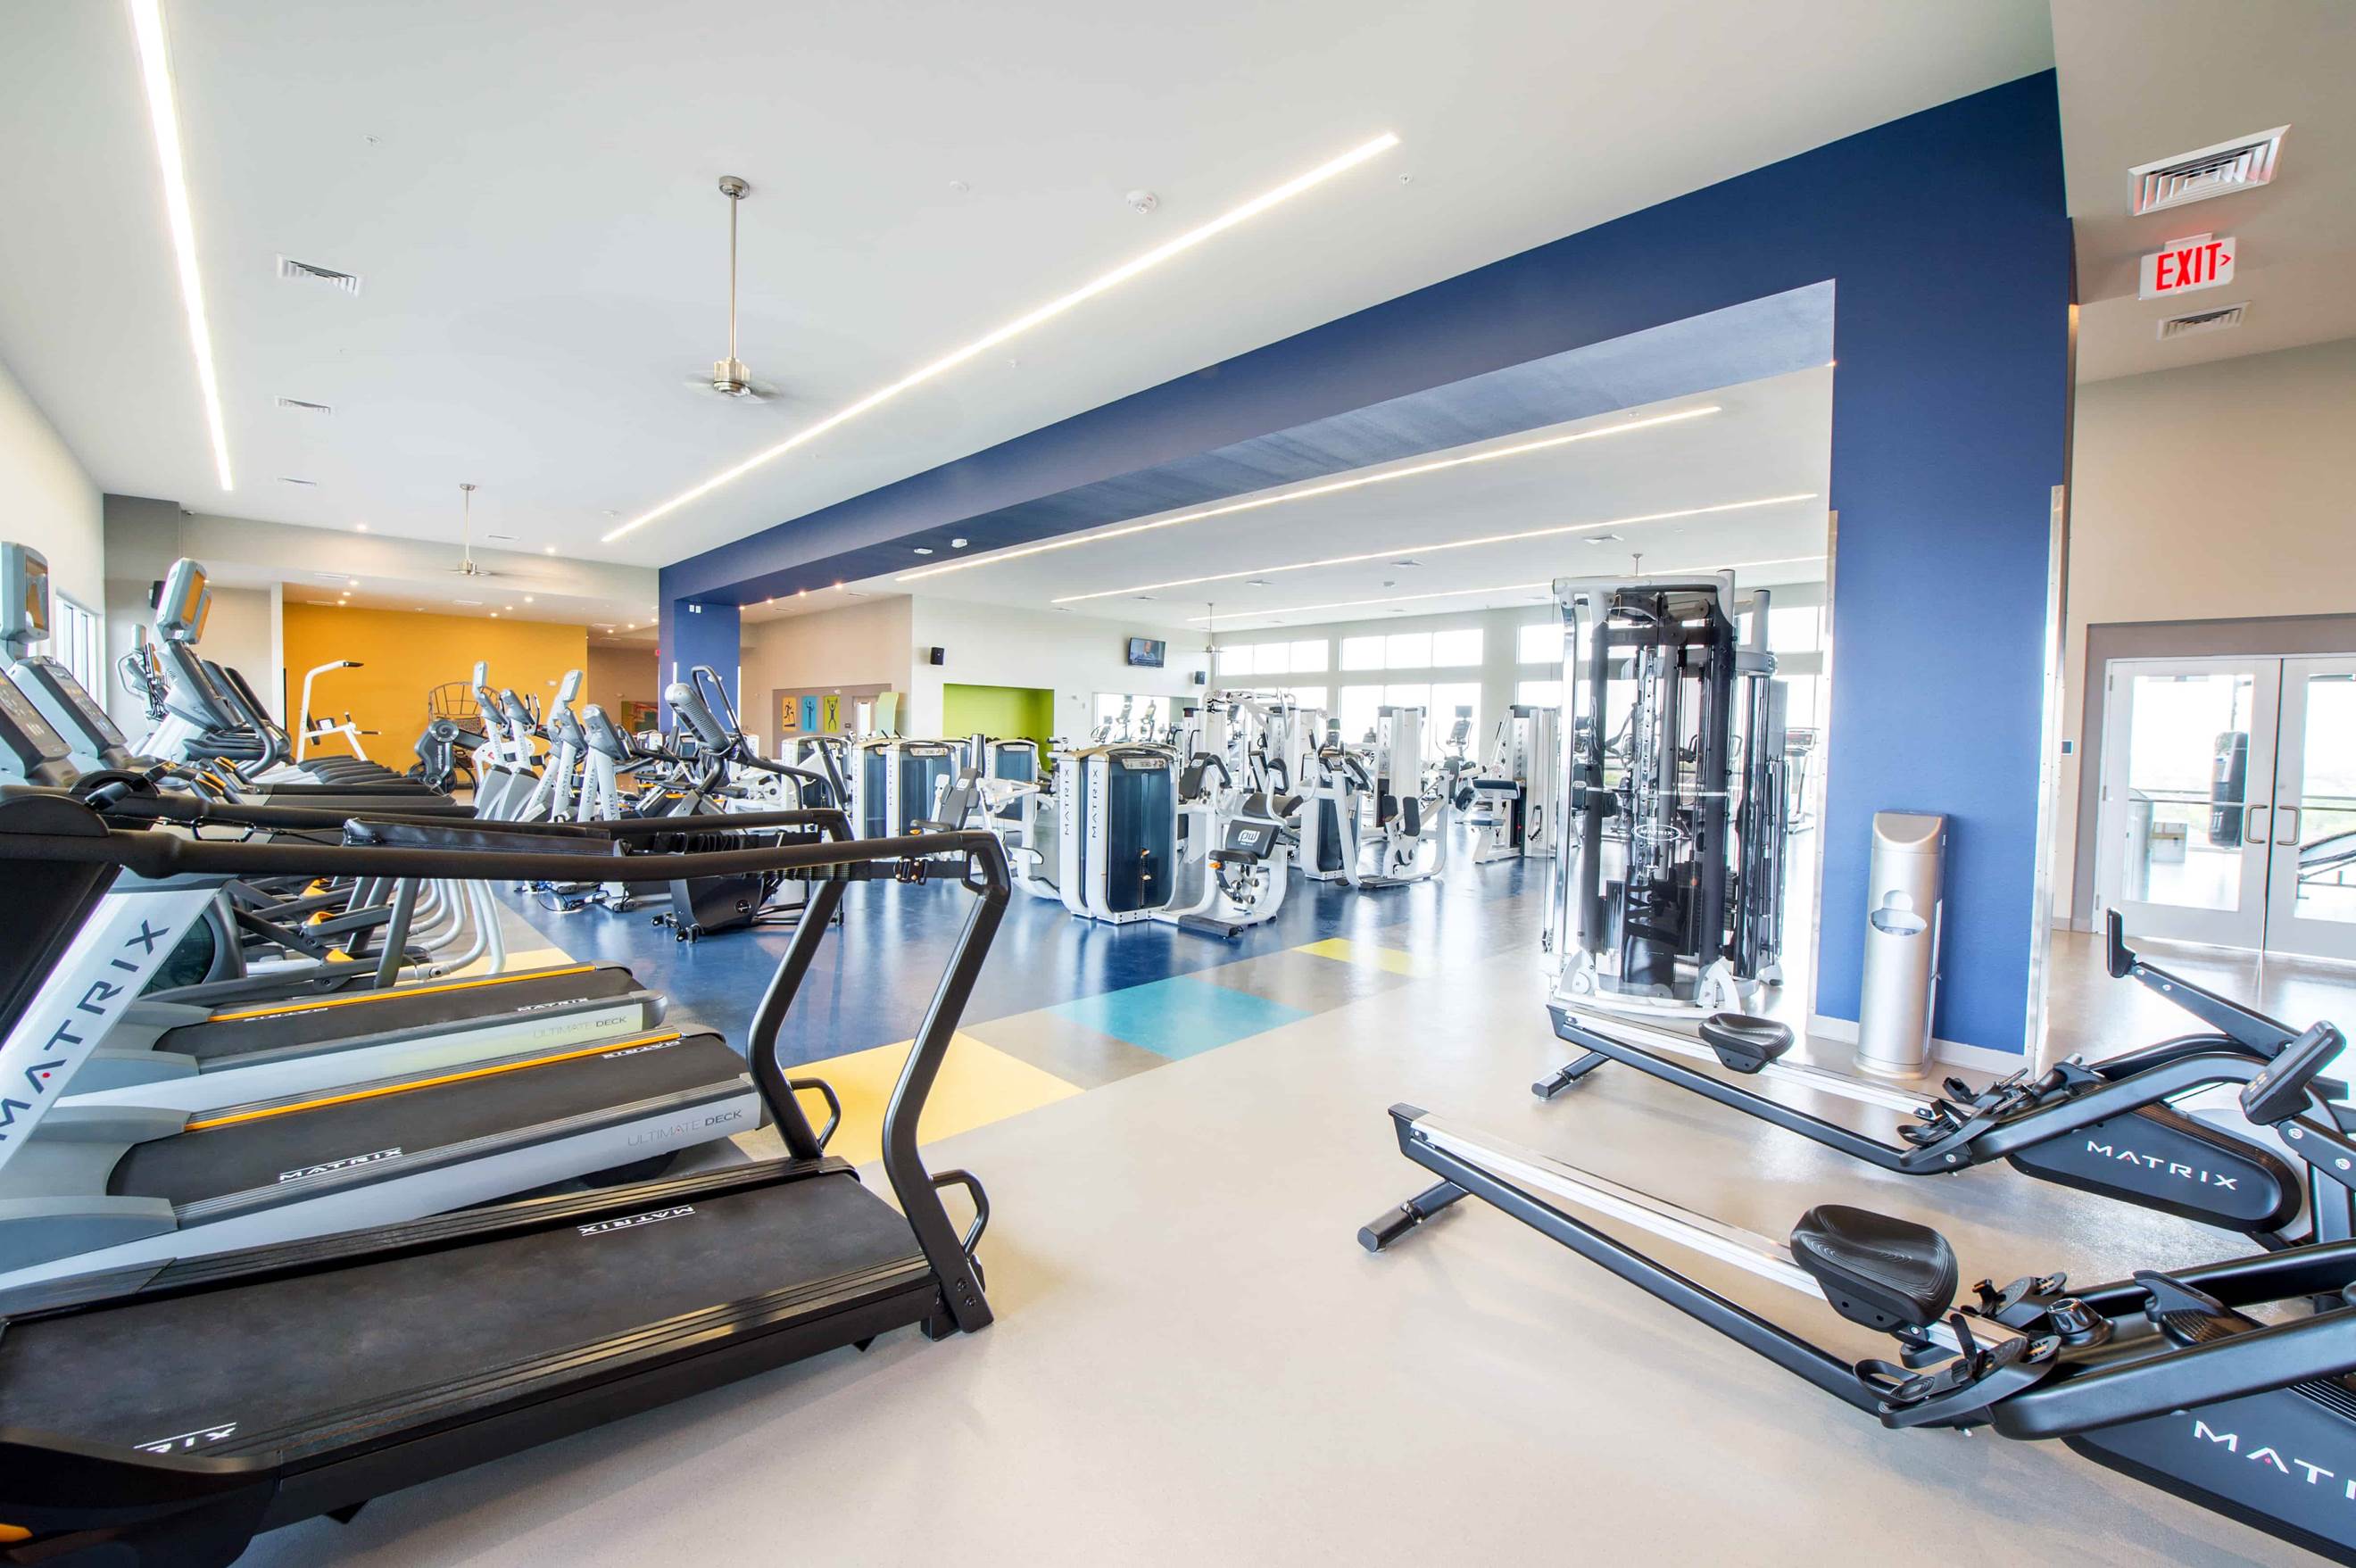 Treadmills and rowers installed ina college gym